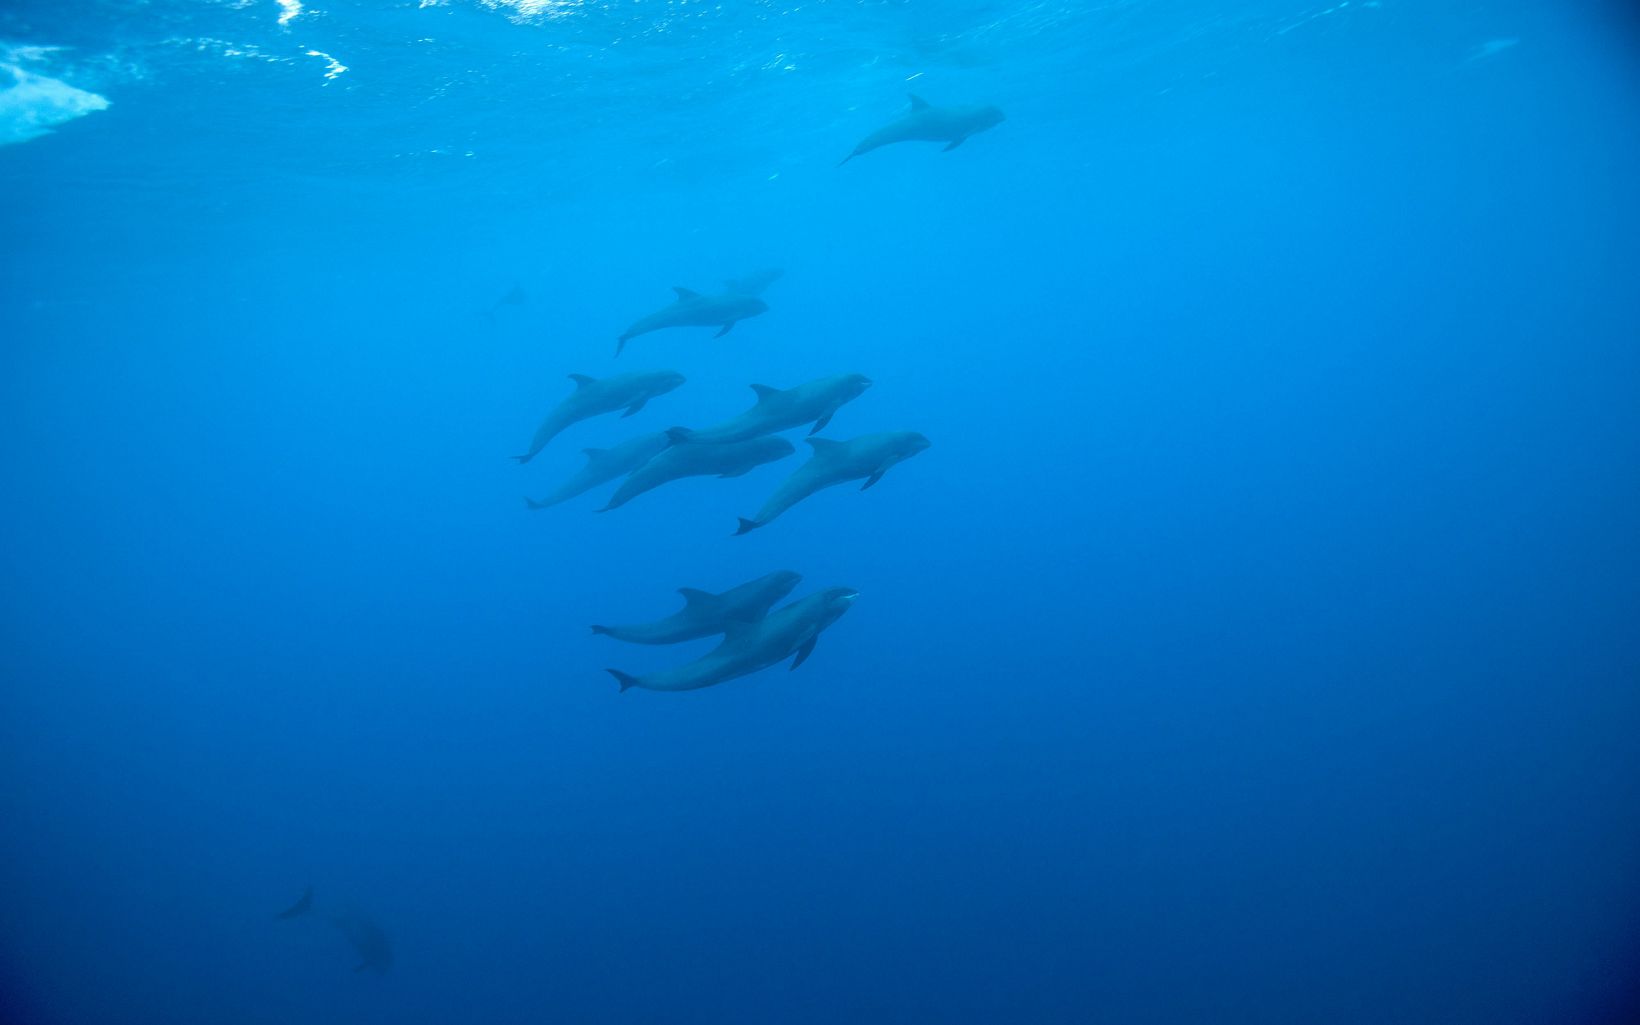 underwater view from a distance of a pod of whales in blue water